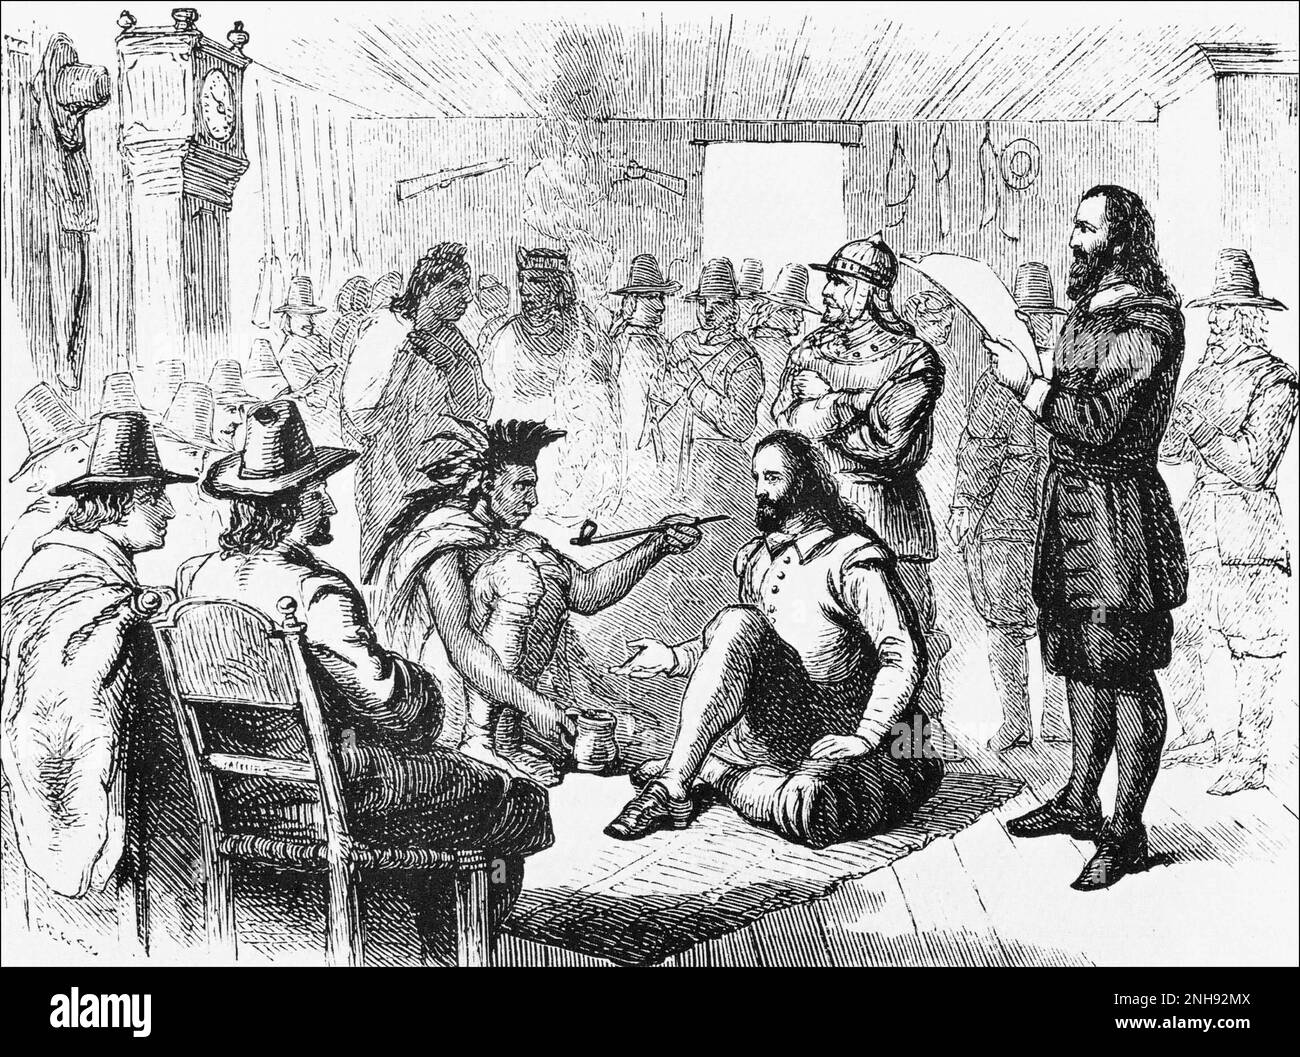 The Wampanoag leader Massasoit (c.1581-1661) smoking a peace pipe with the Plymouth governor John Carver after signing a treaty in 1621. Engraving from before 1898. Stock Photo